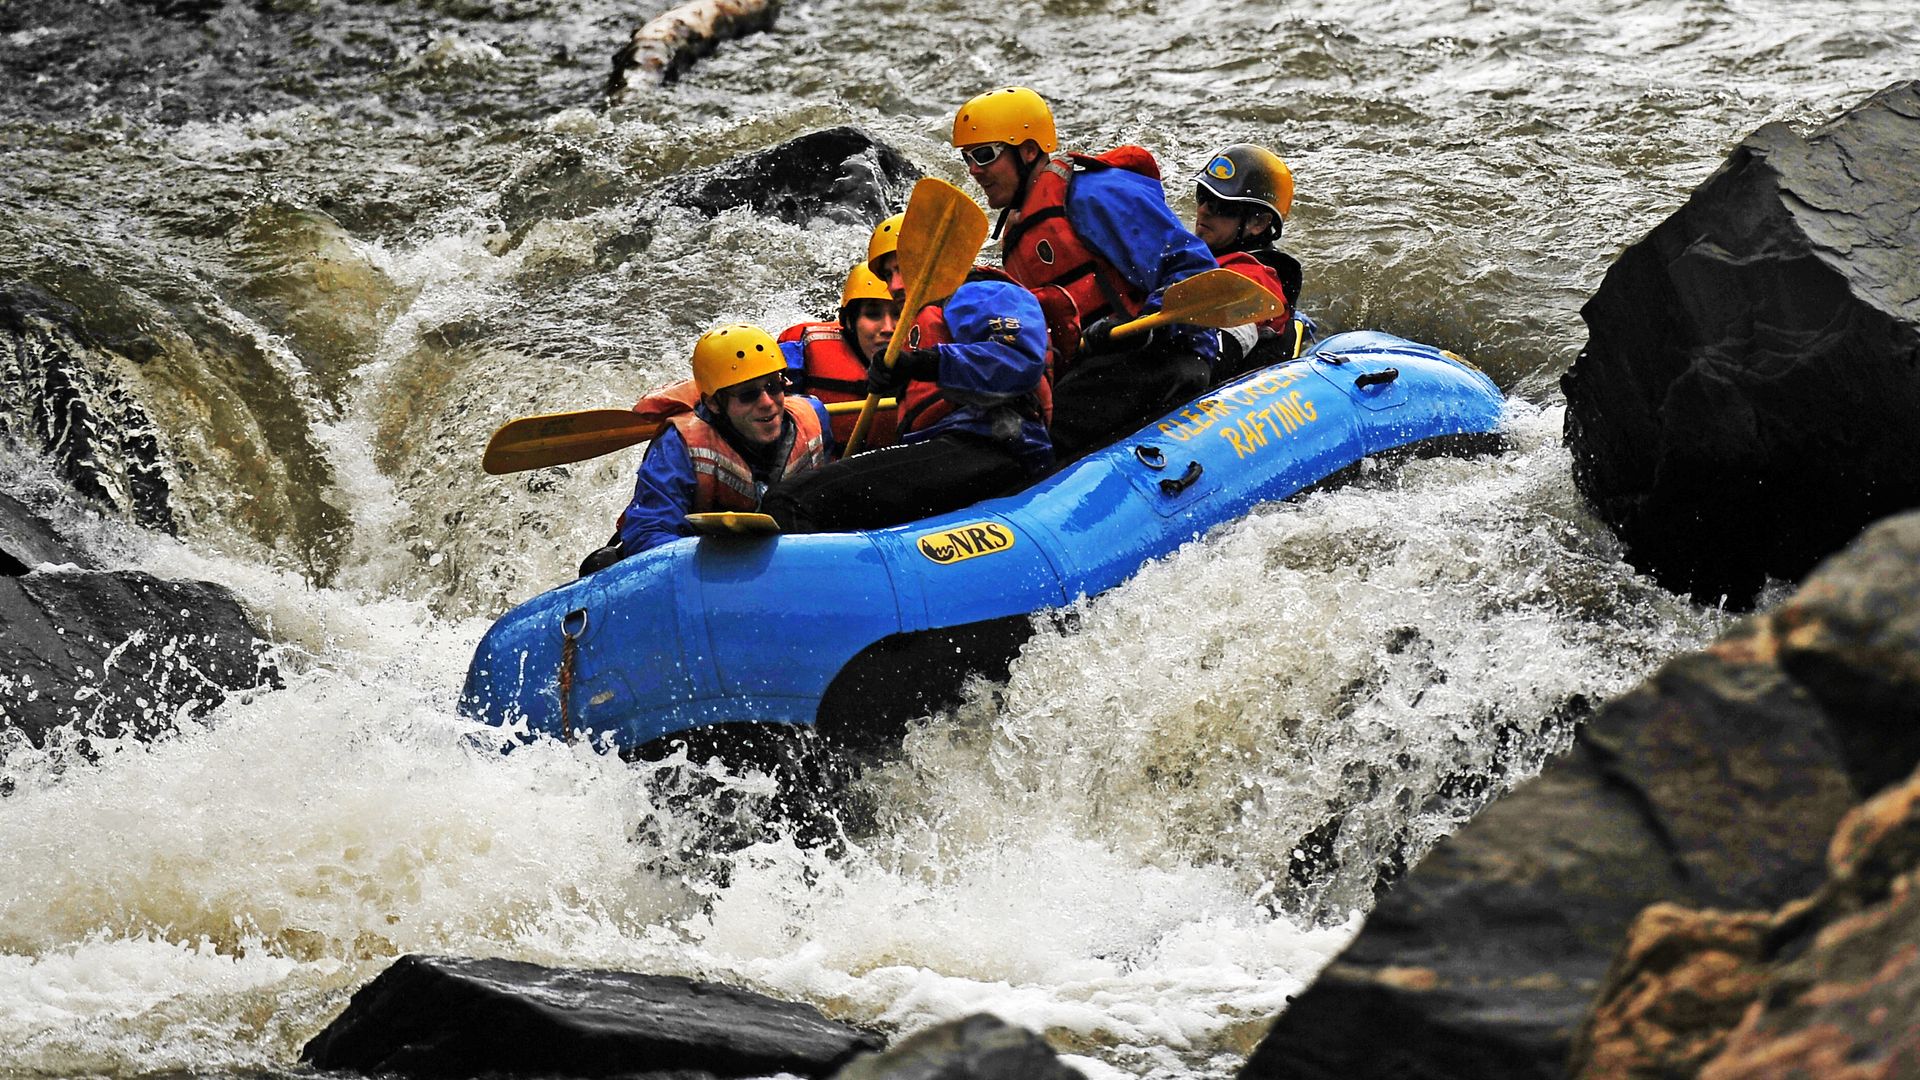 Rafters make their way down Clear Creek near Idaho Springs in 2011. Photo: RJ Sangosti/The Denver Post via Getty Images